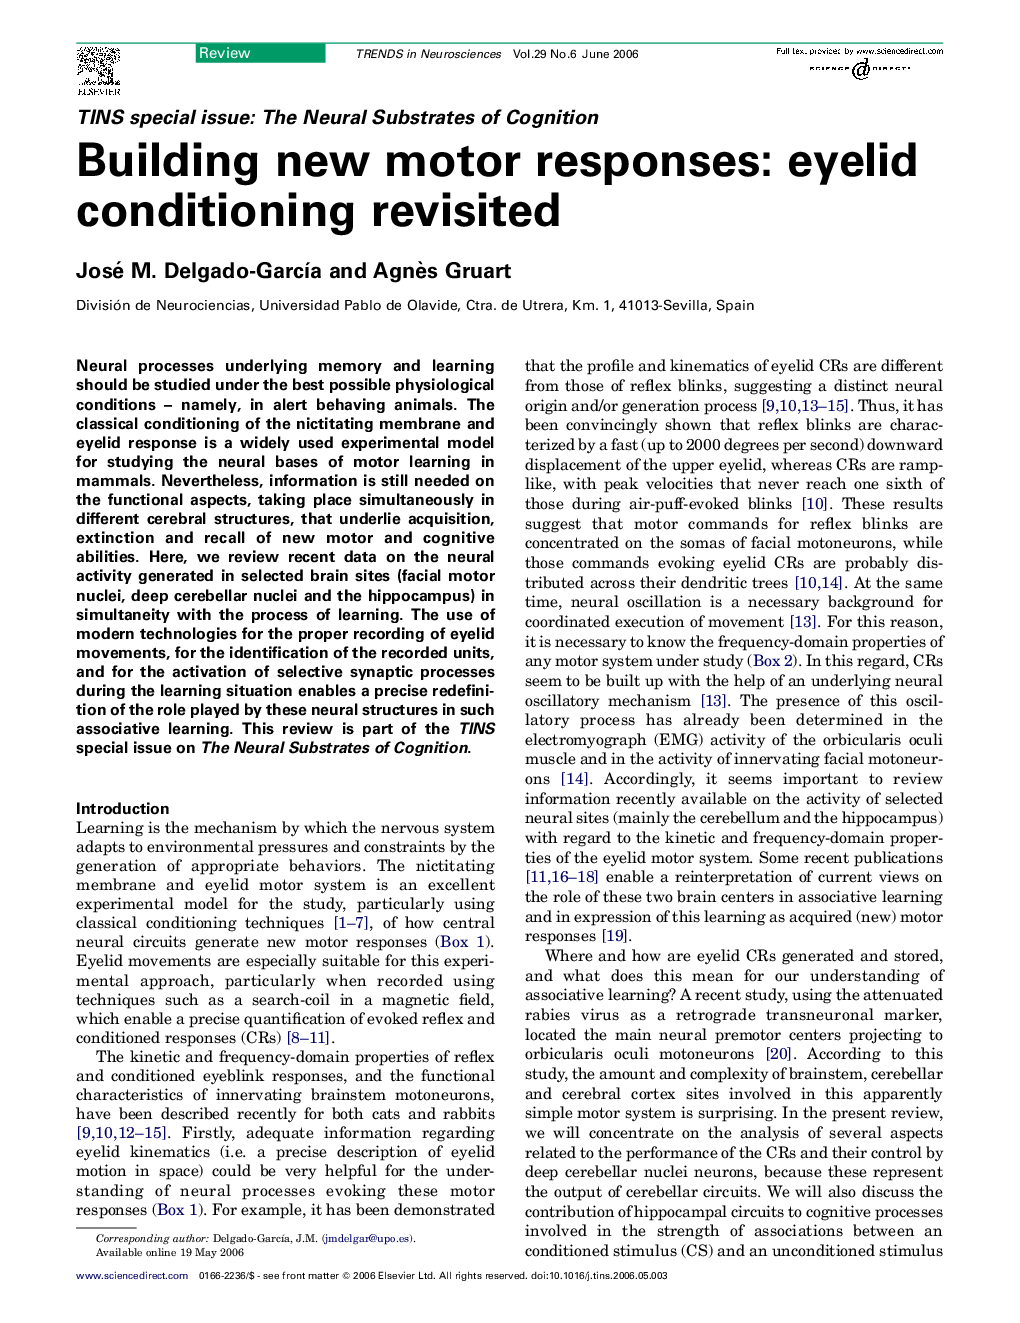 Building new motor responses: eyelid conditioning revisited